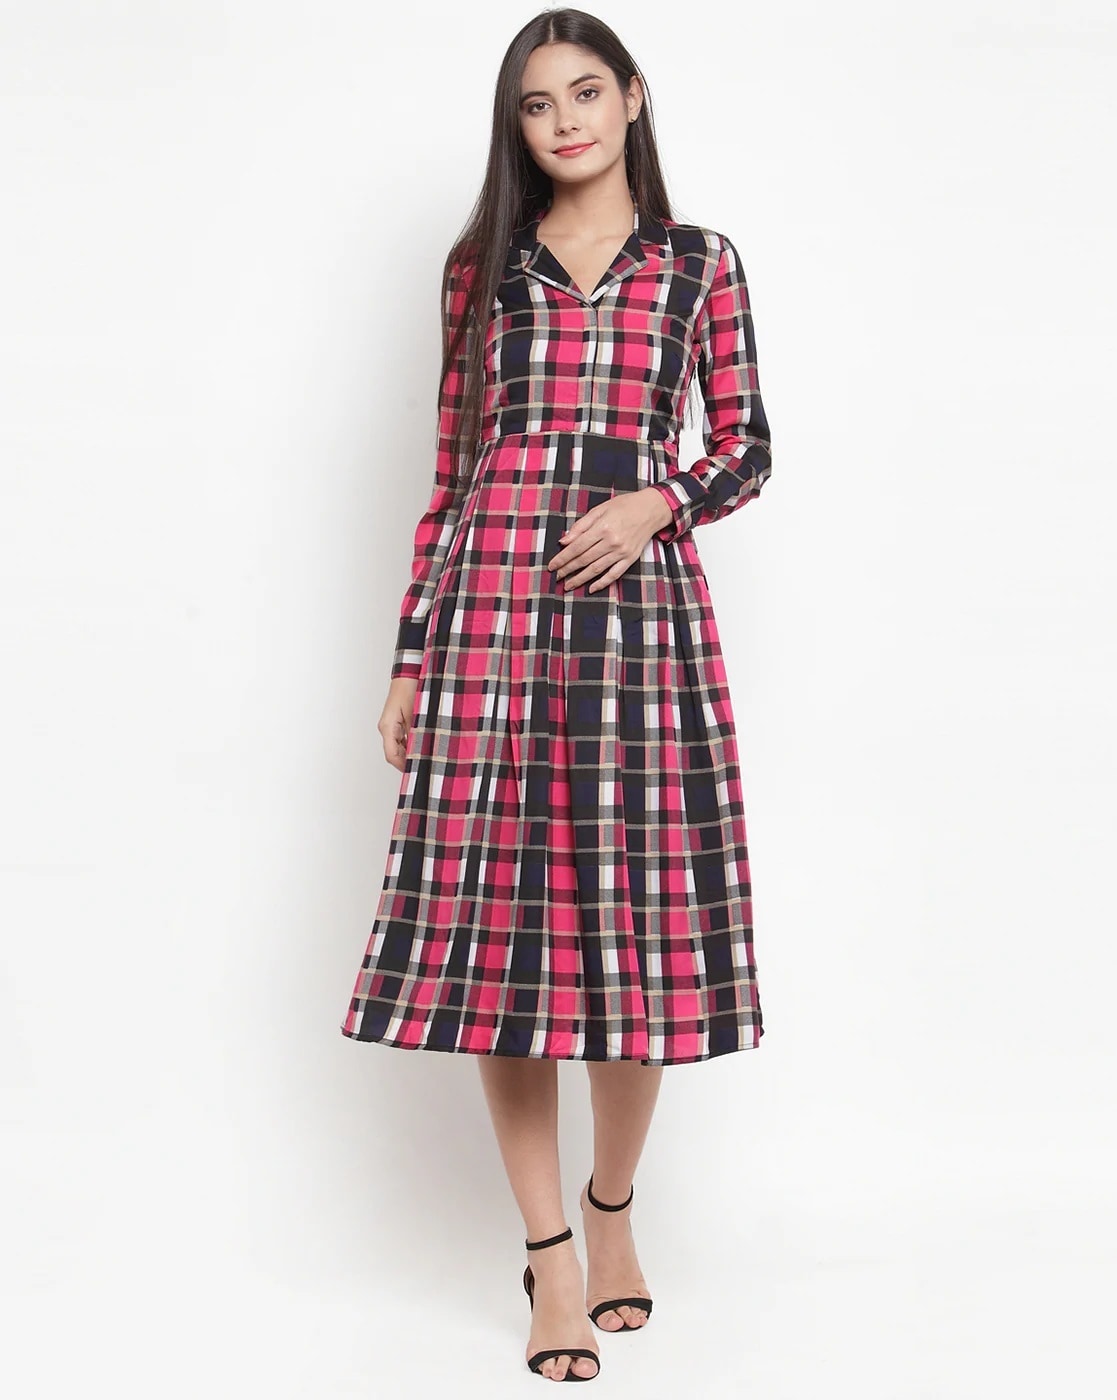 Buy Fabnest Womens Black and Red Check Dress at Amazon.in